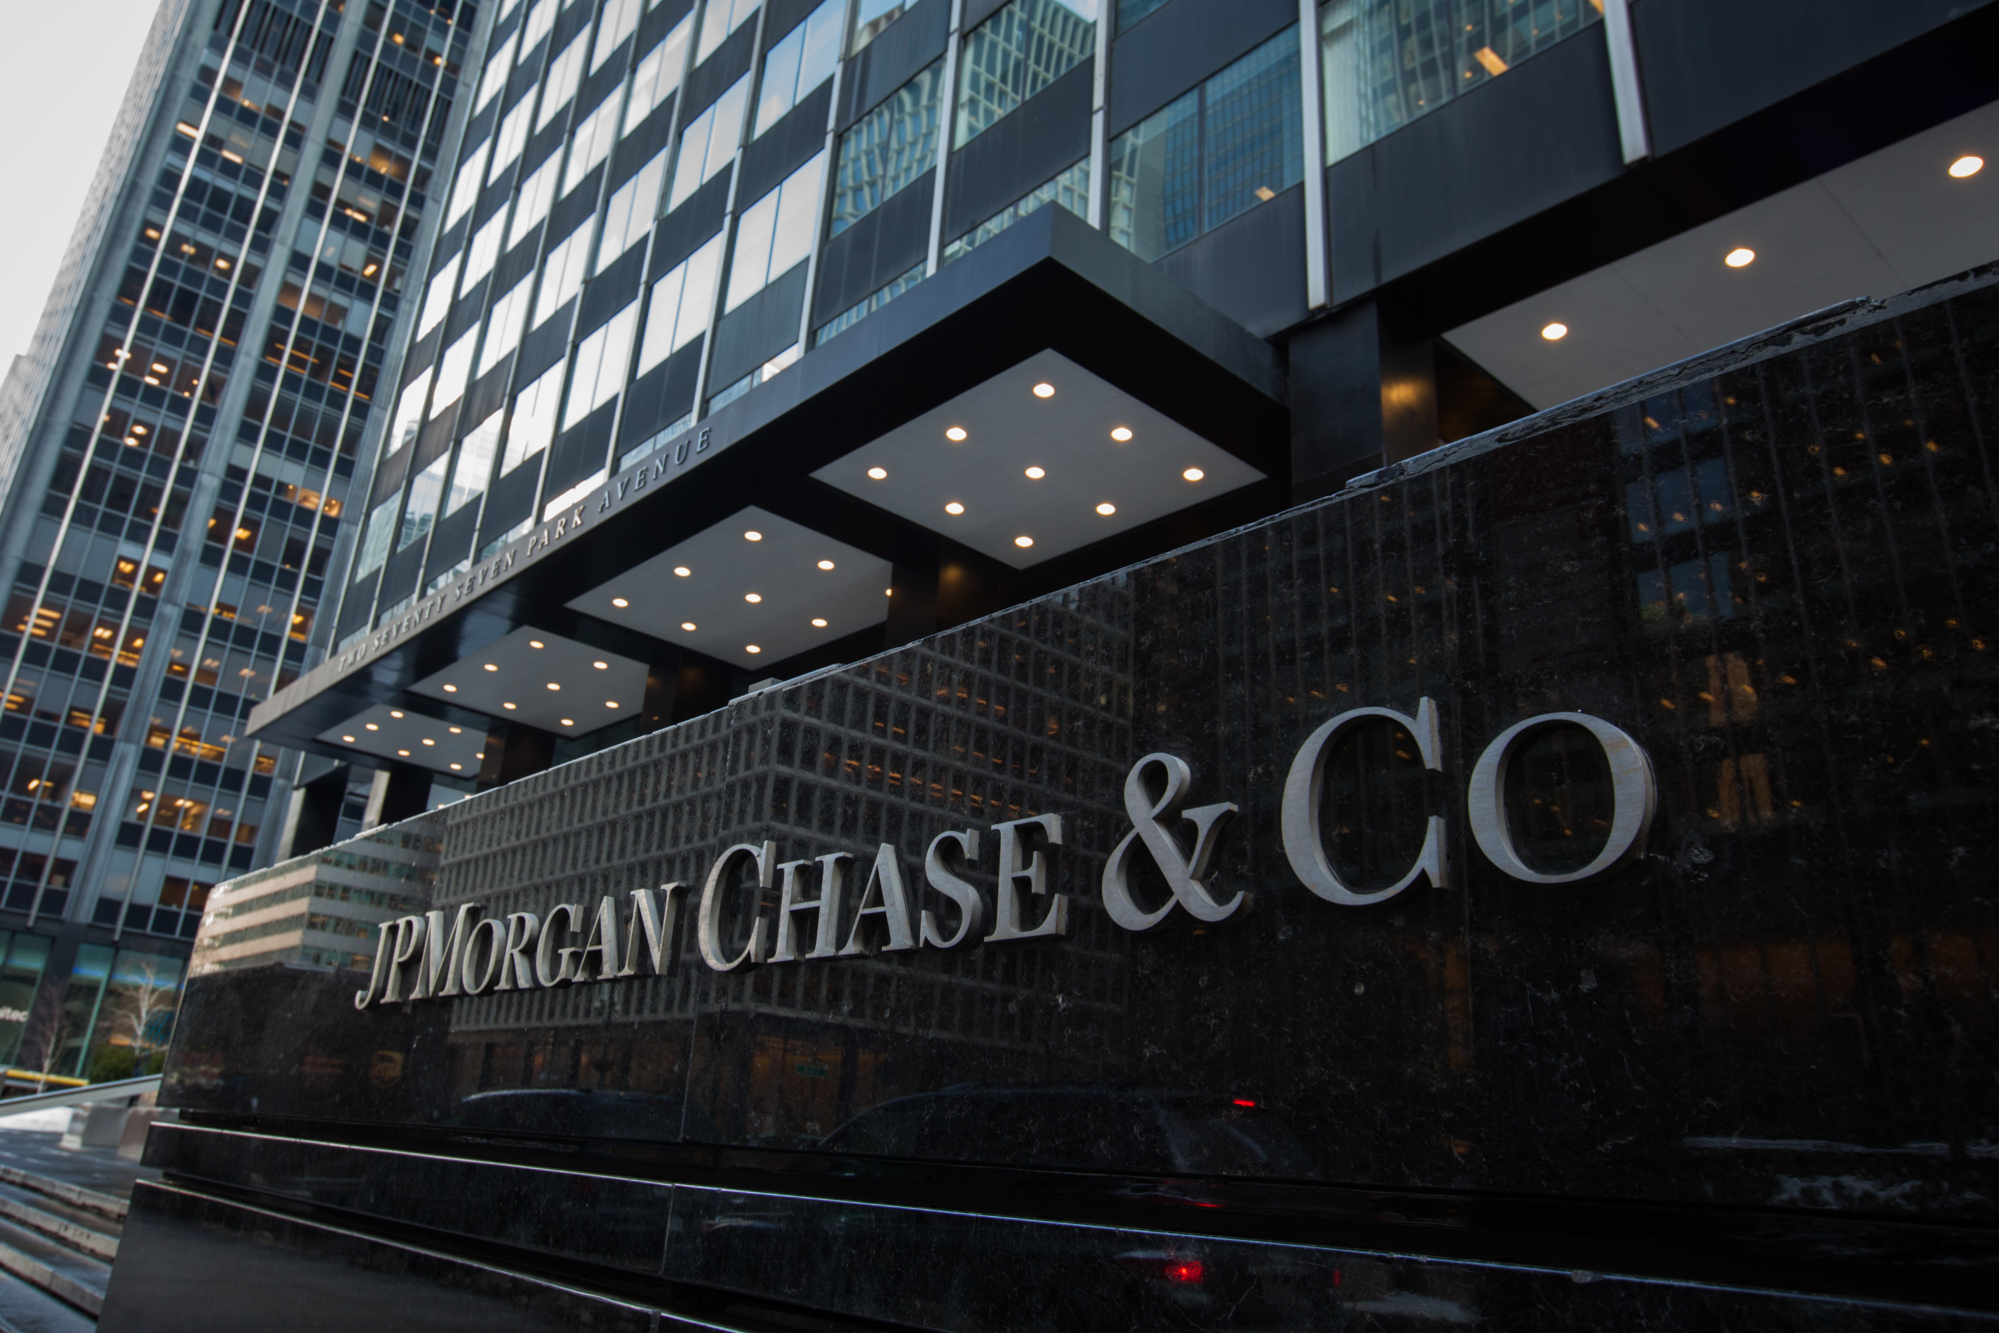 JPMorgan Chase signage is displayed outside of a building in New York City, New York, U.S., on Tuesday, January 9, 2017.